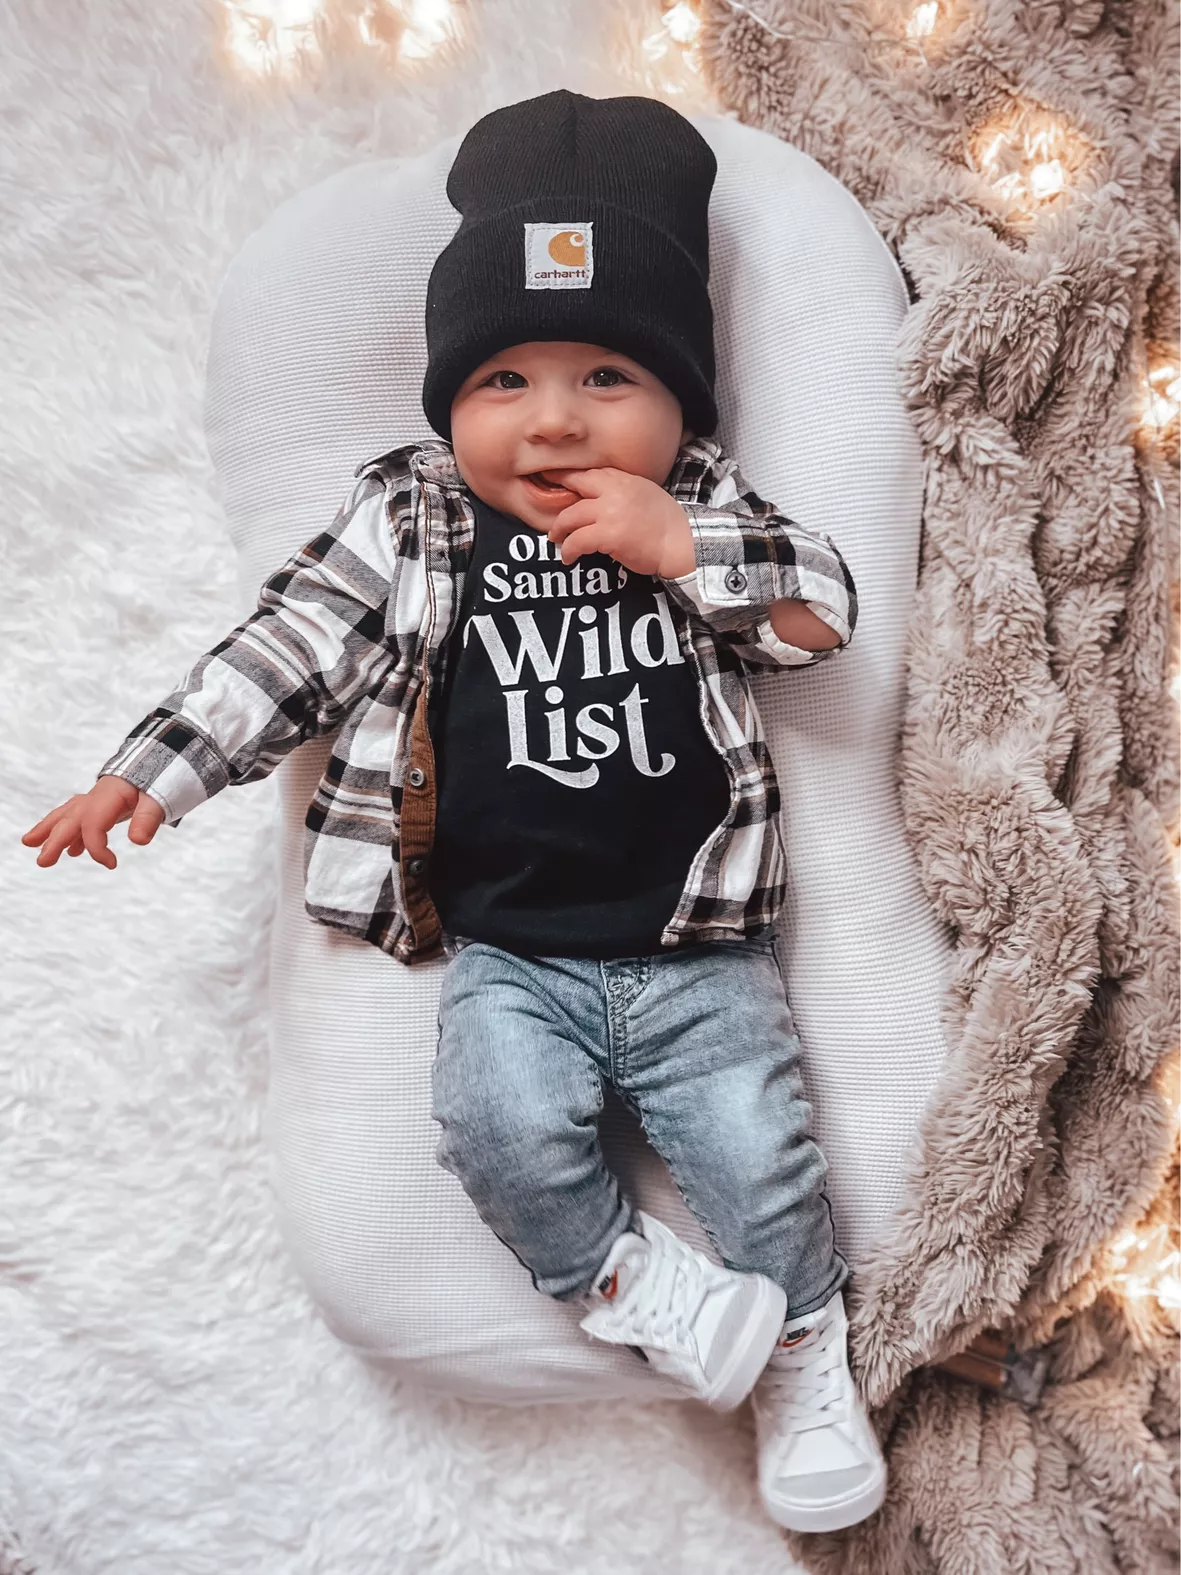 Carhartt for the Family  Cute boy outfits, Cute outfits for kids